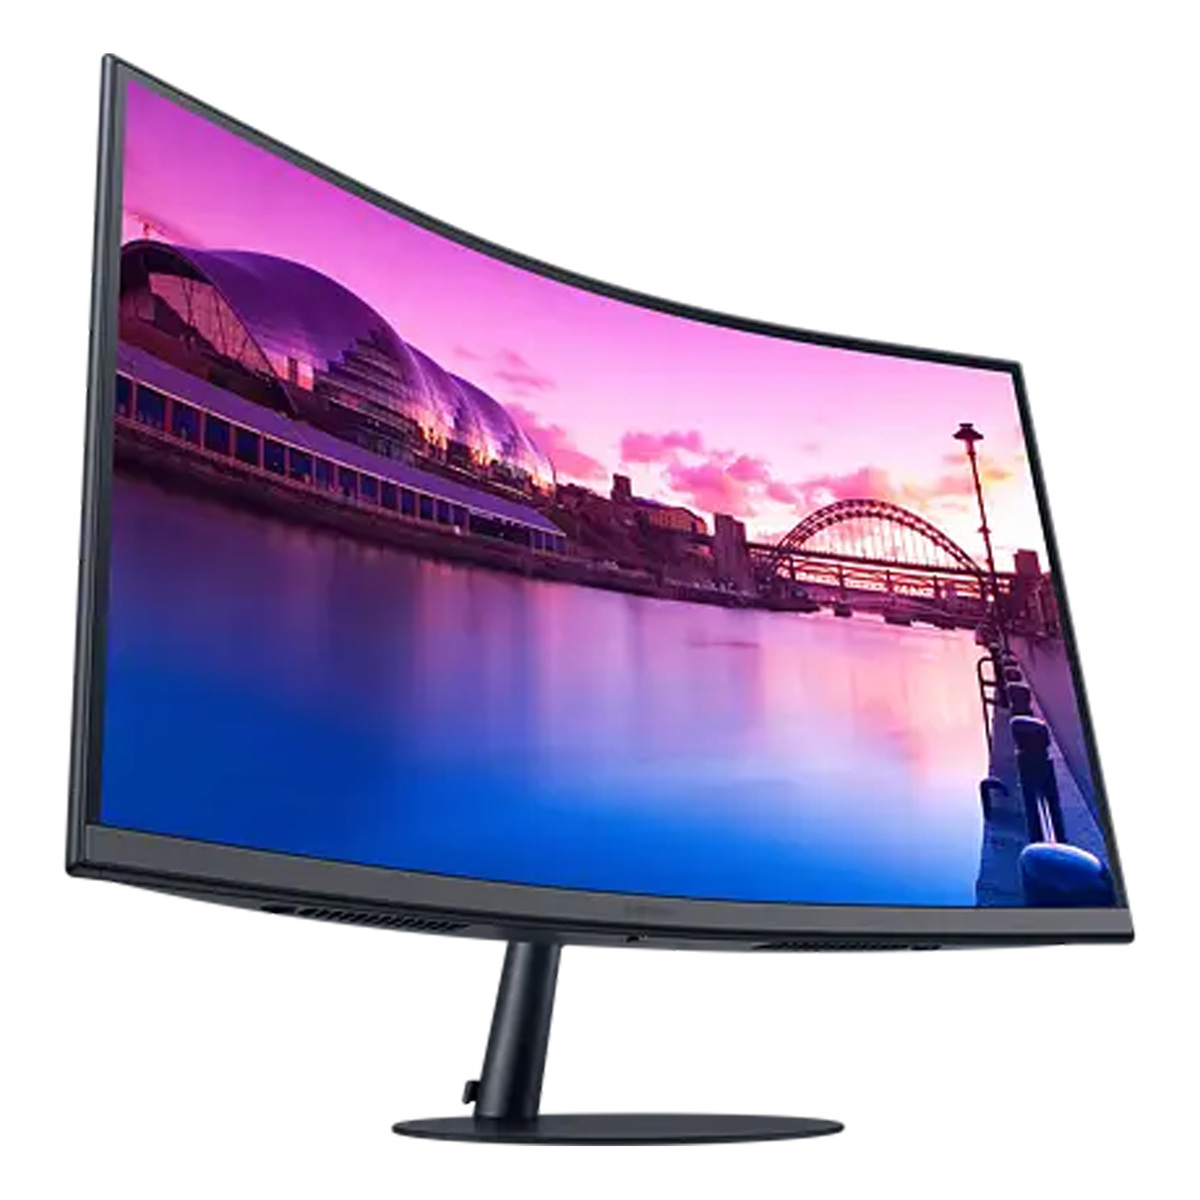 Samsung Curved Monitor, 32 inches, LS32C390